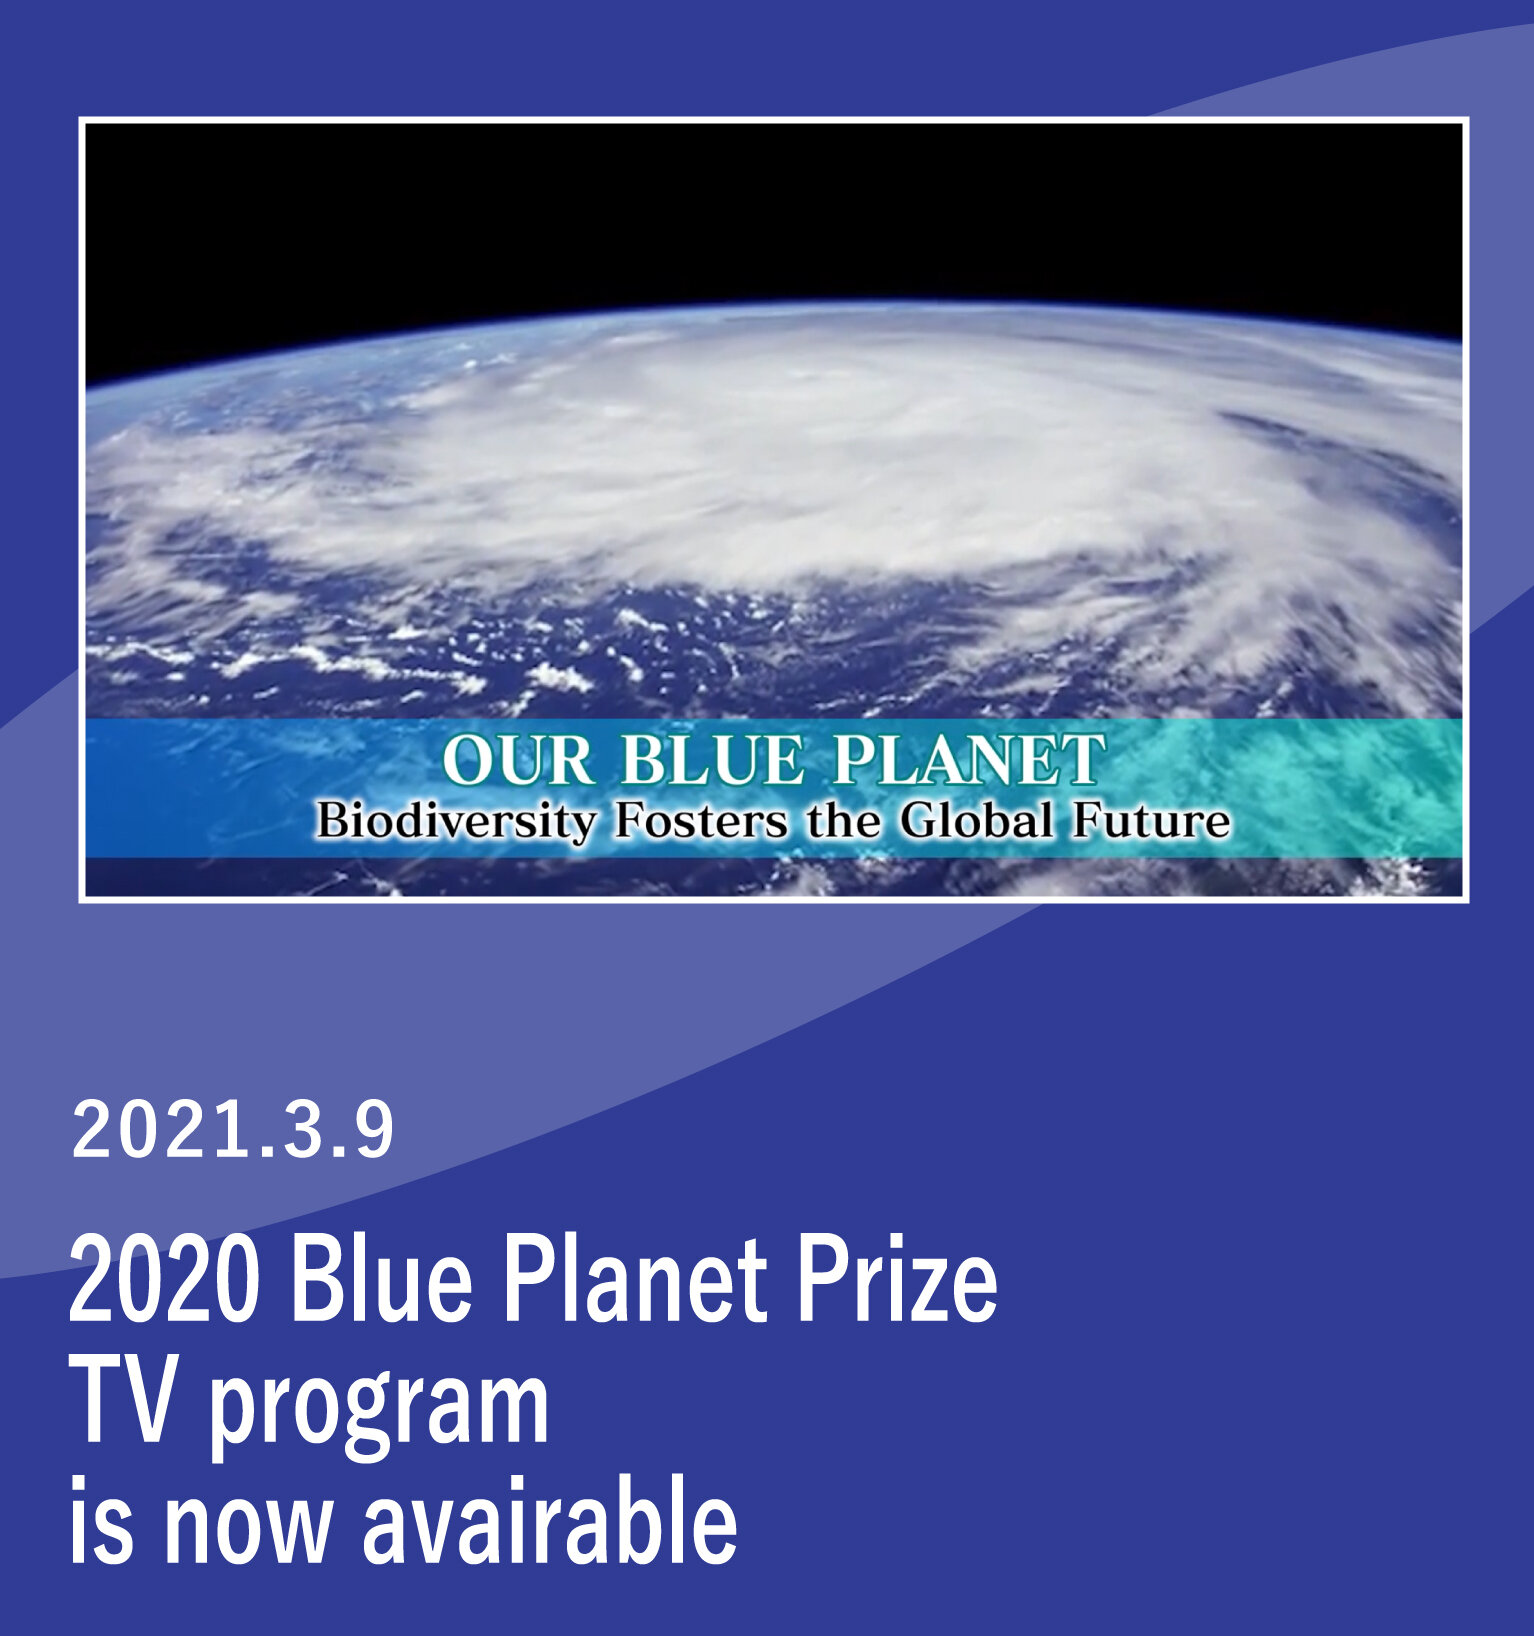 TV program, Our Blue Planet, featuring 2020 Blue Planet Prize winners, is now available on our website